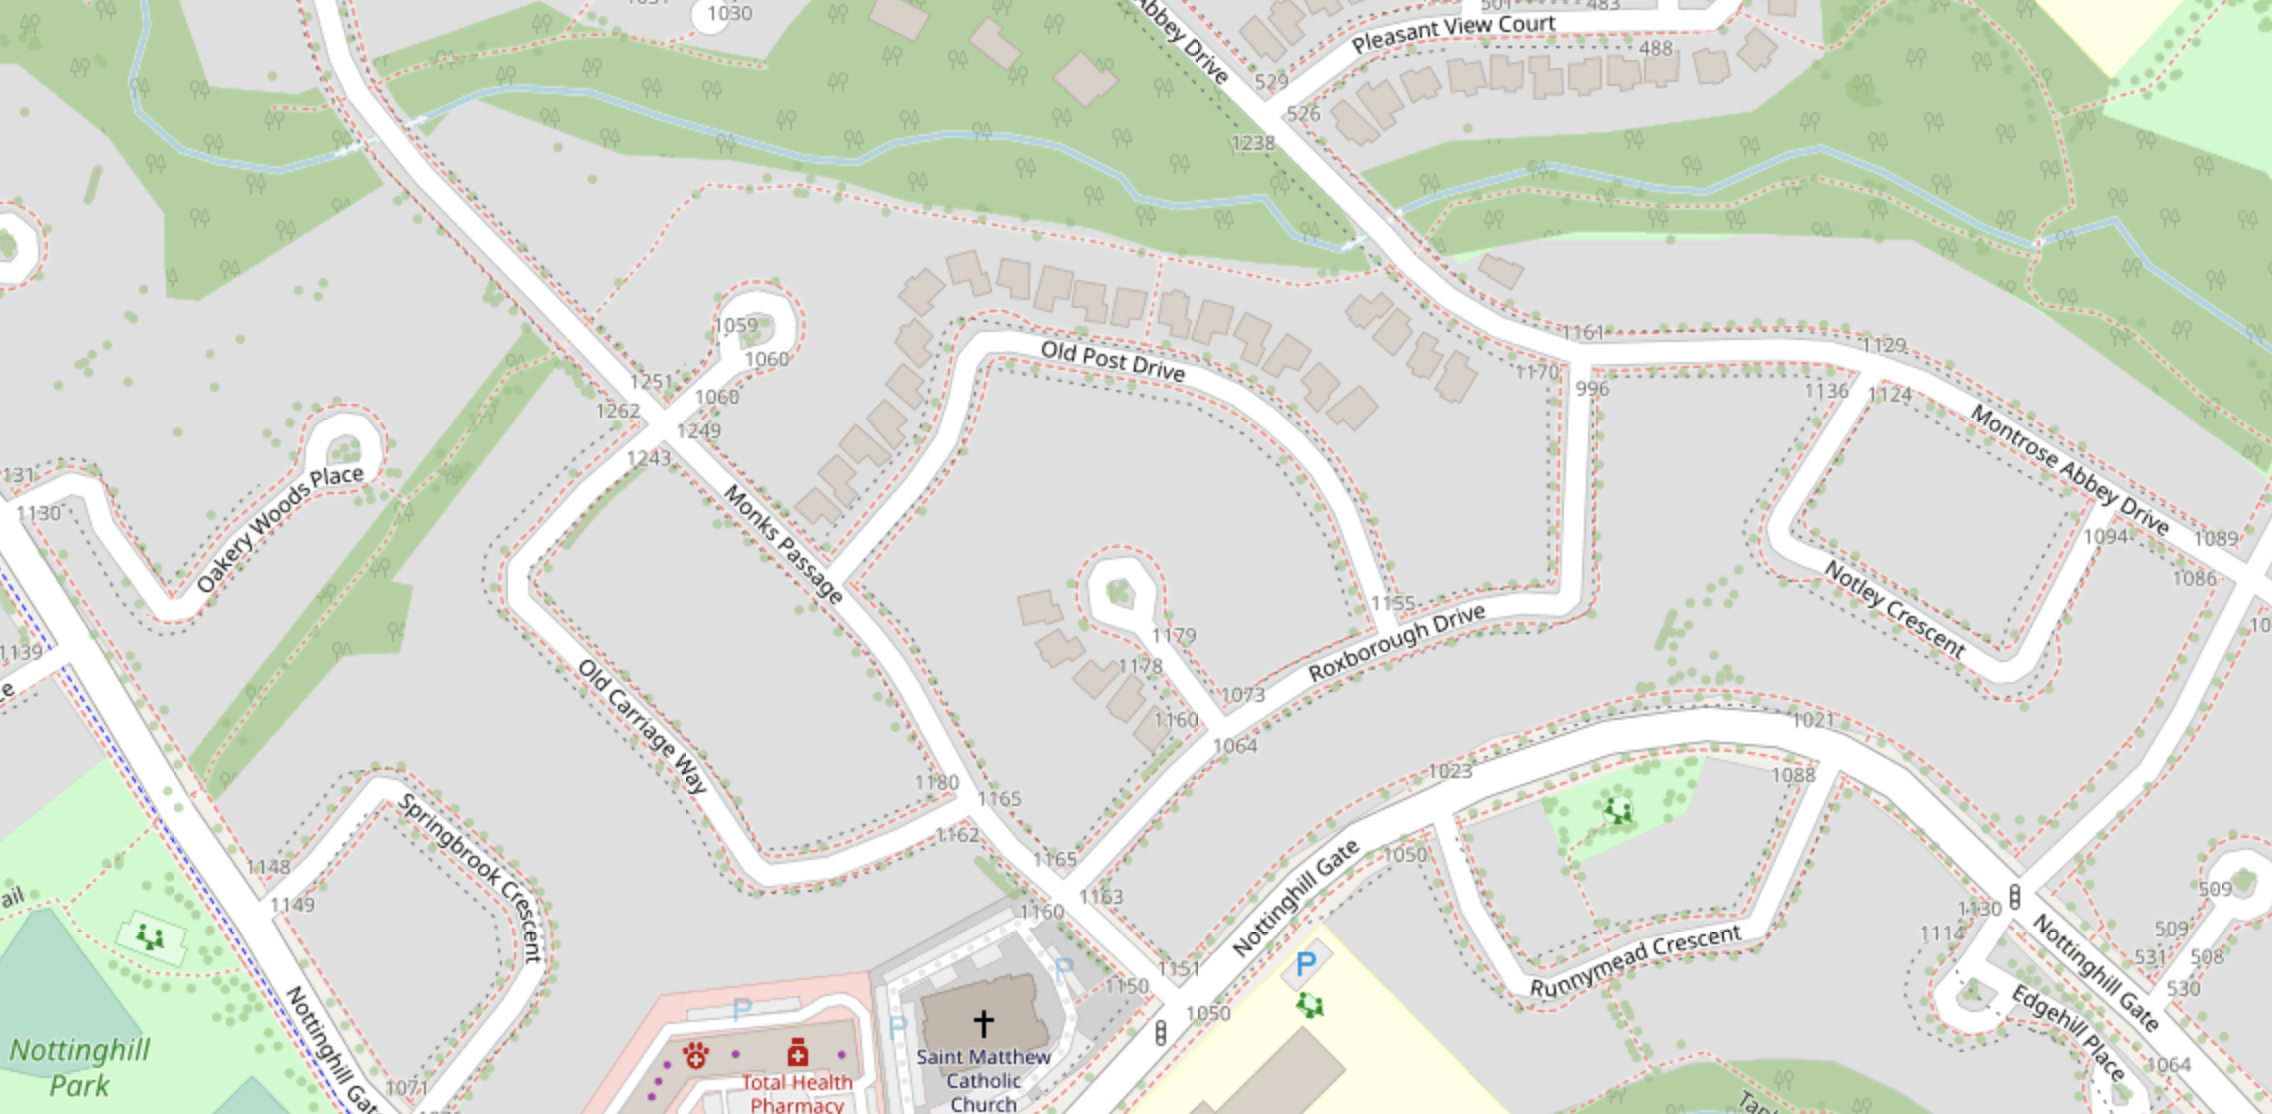 Location of the home on Old Post Drive | Openstreetmap